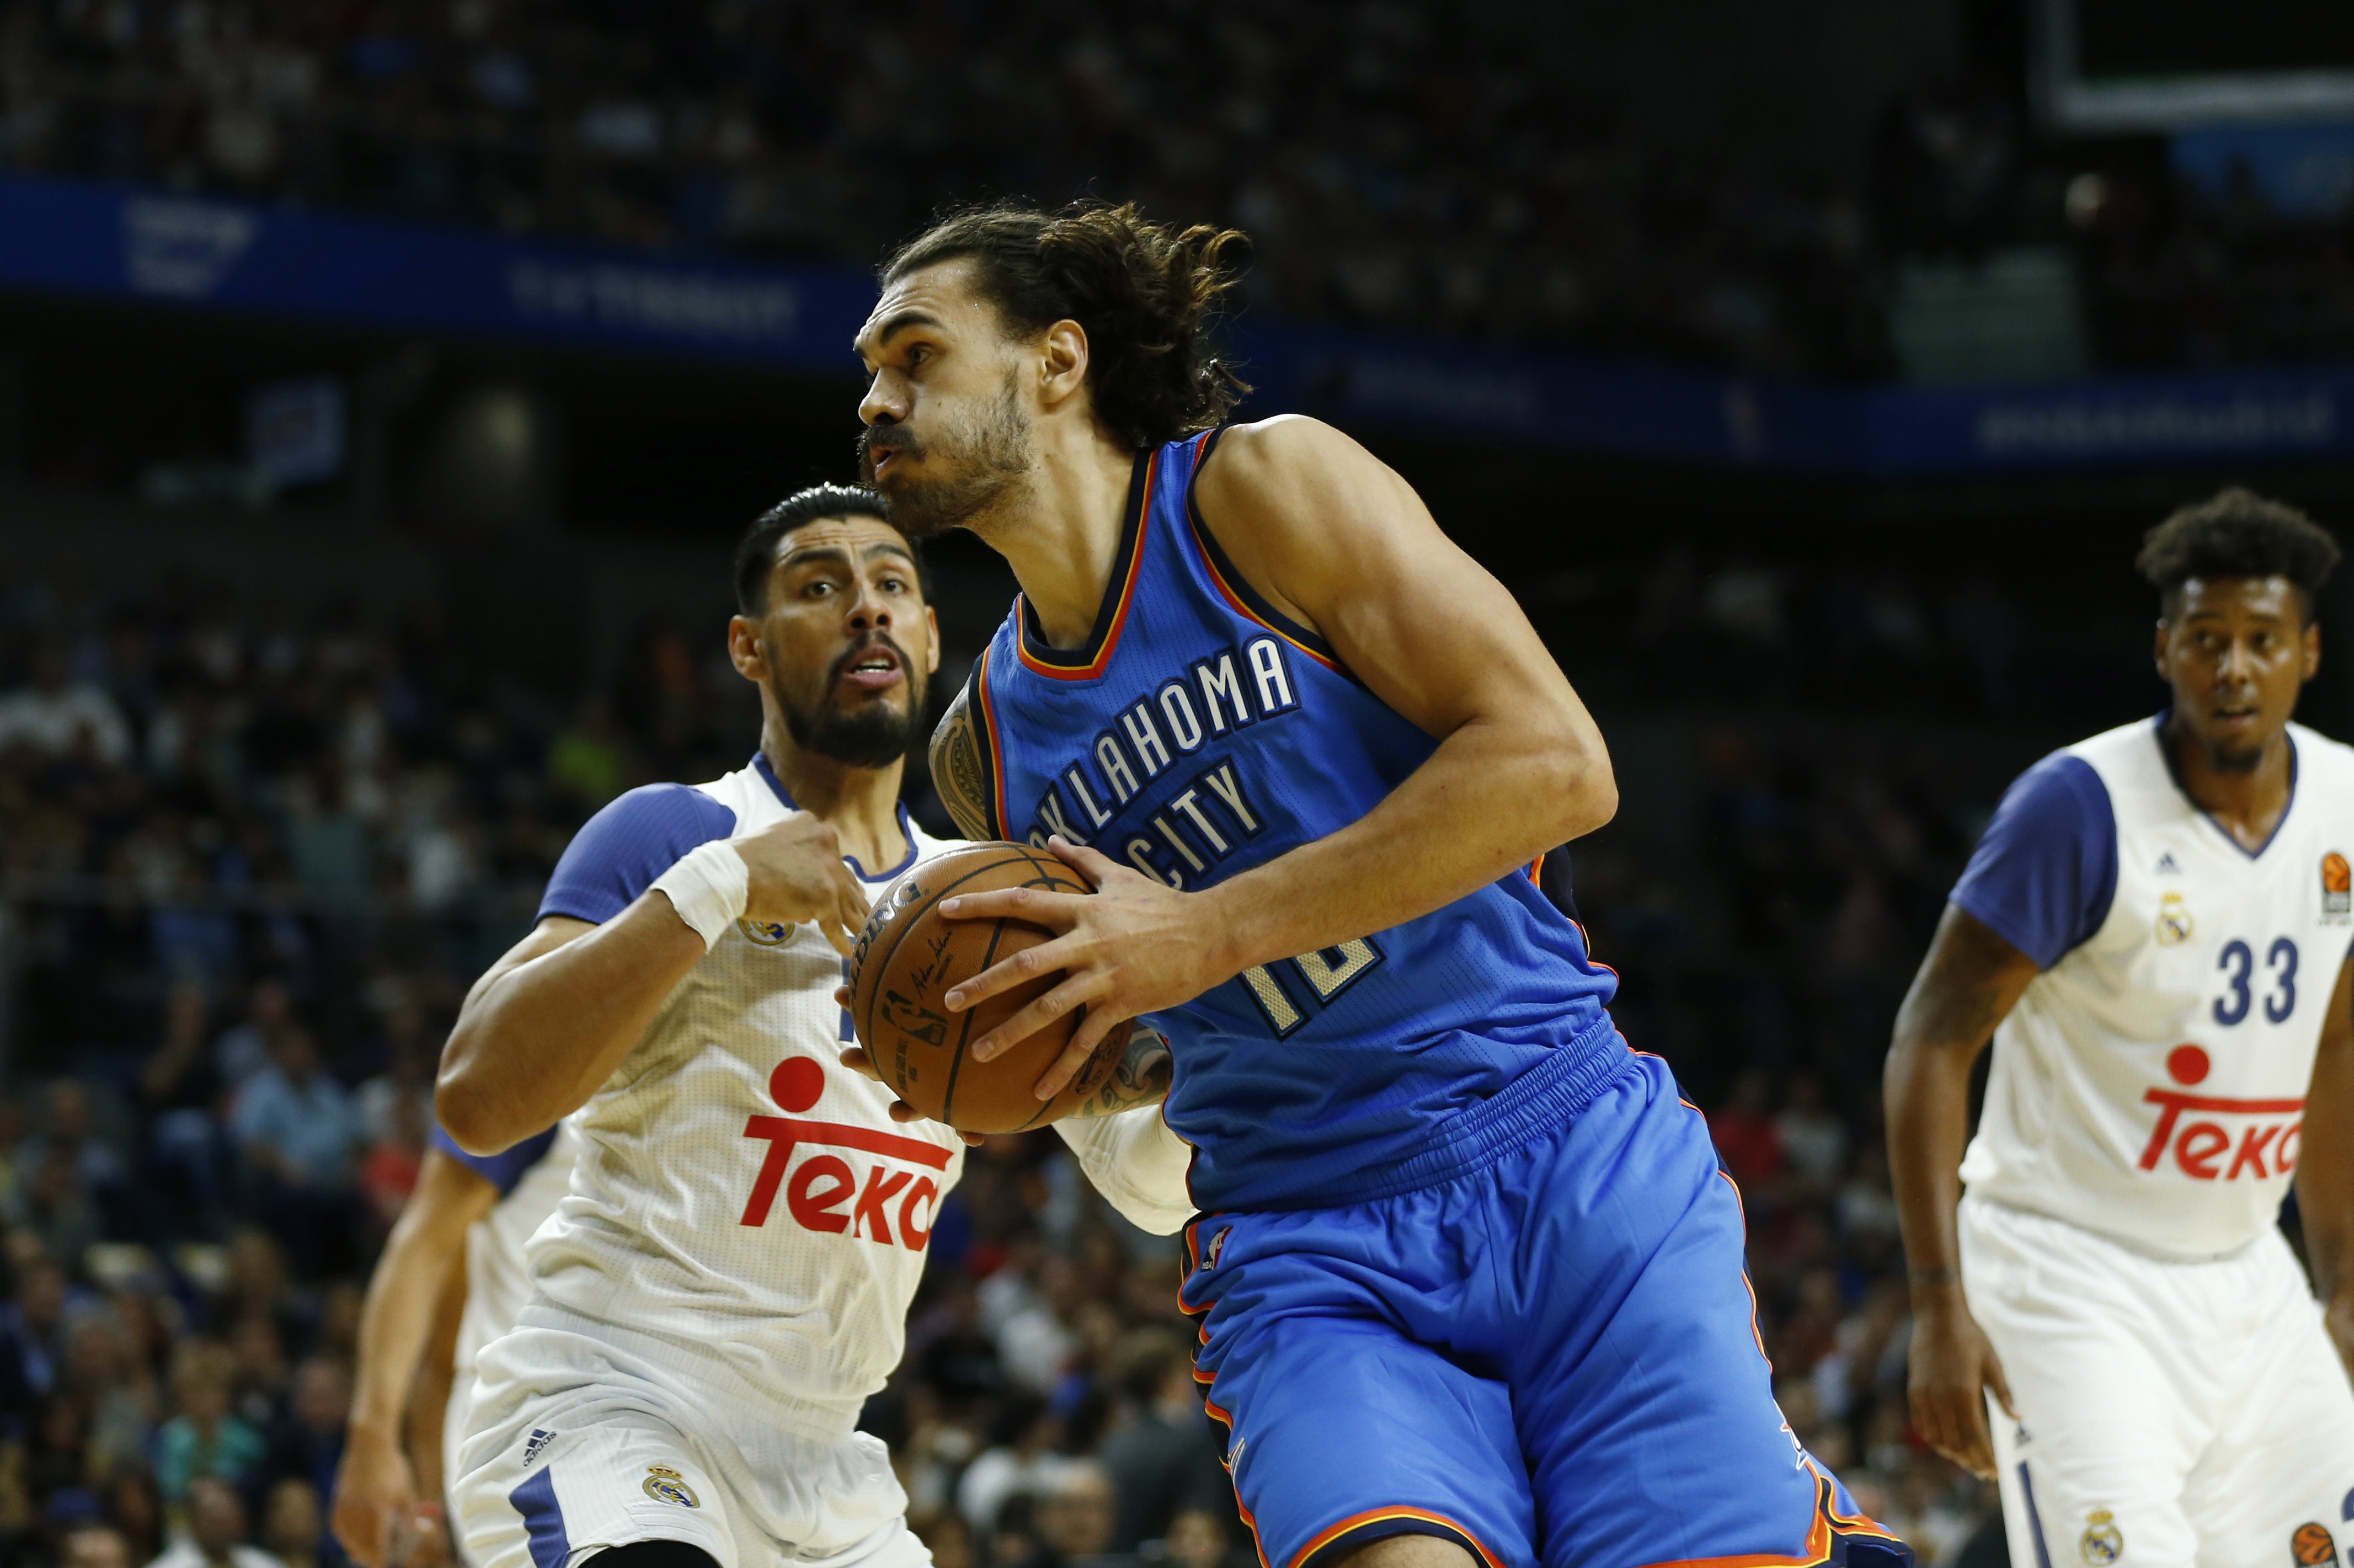 Basketball: Oklahoma City Thunder star Steven Adams opens up on spending  time on his farm in New Zealand and the NBA restart - NZ Herald